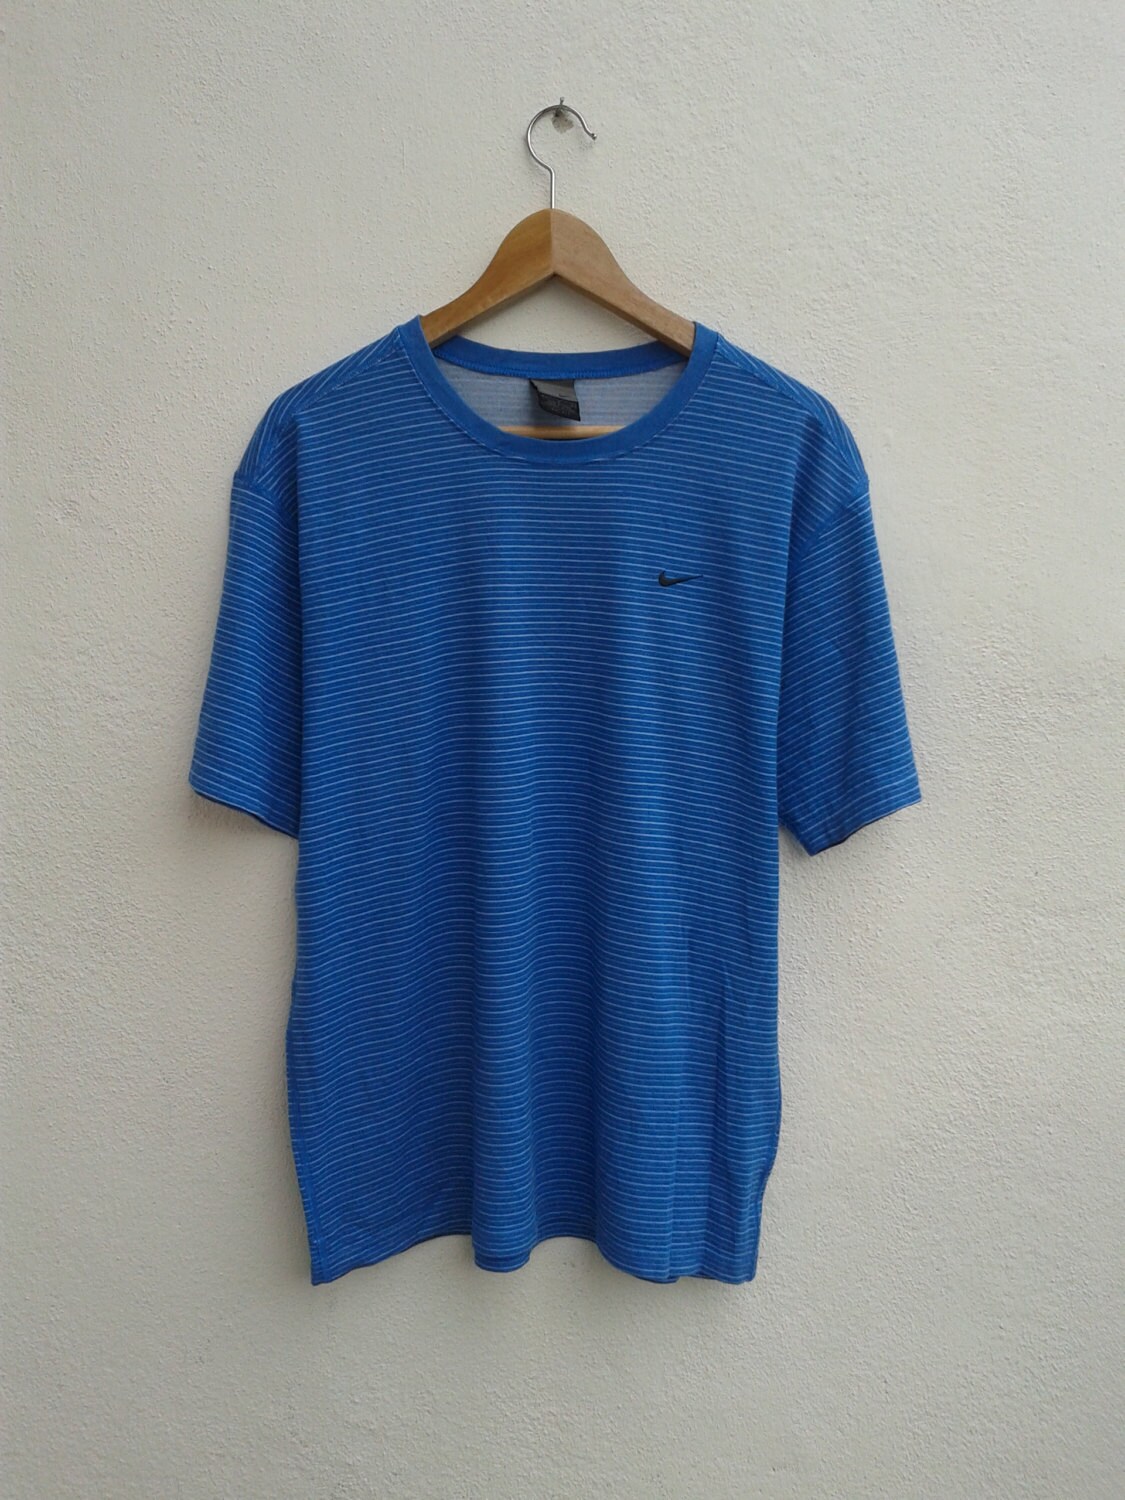 XMAS SALE Vintage 90s Nike Swoosh Stripes Andre Aggasi Style Challenge ...